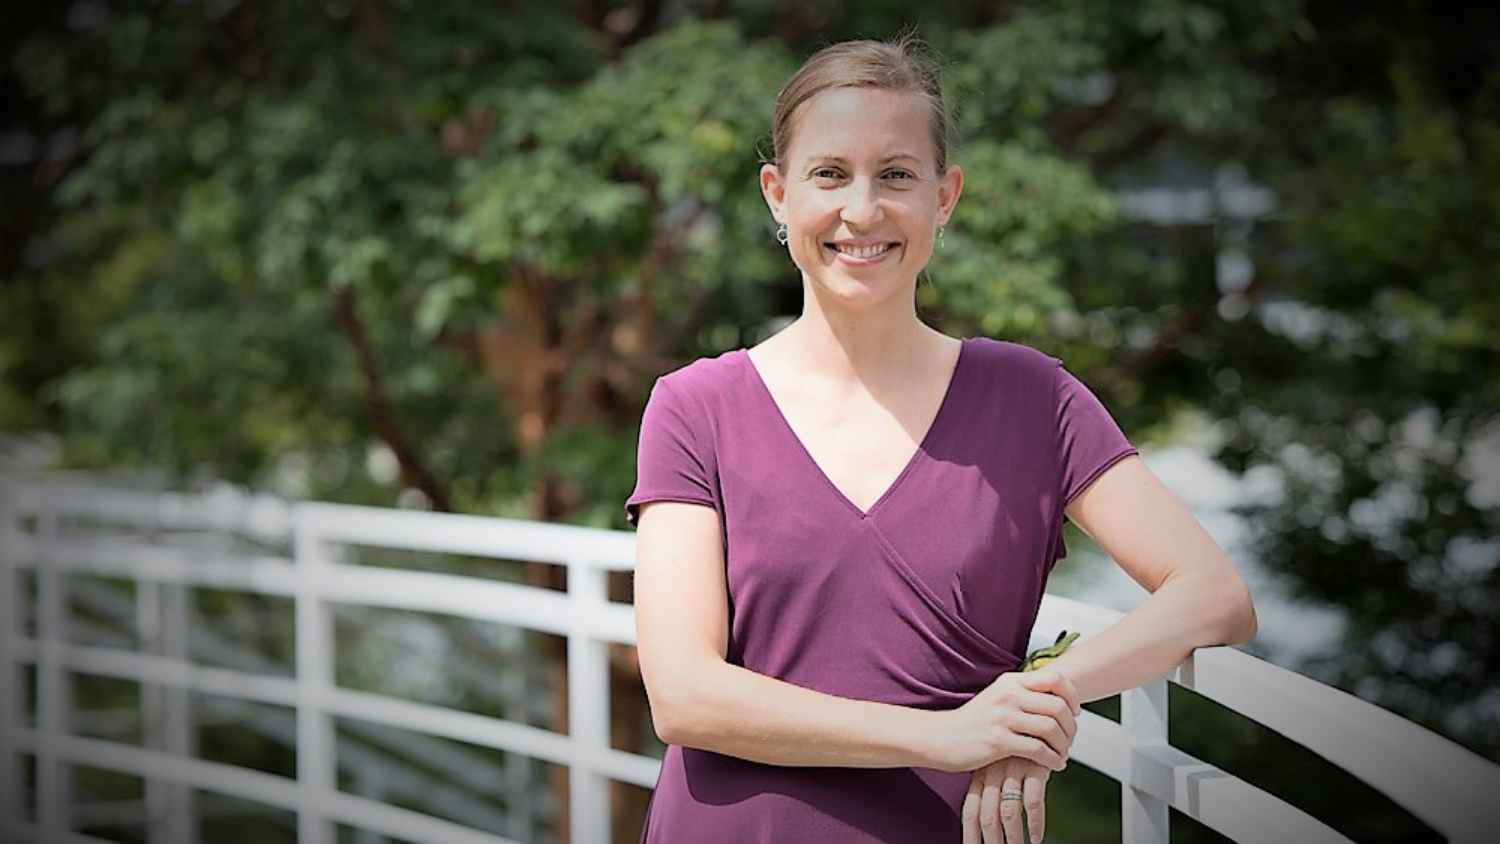 Khara Grieger, NC State assistant professor and extension specialist